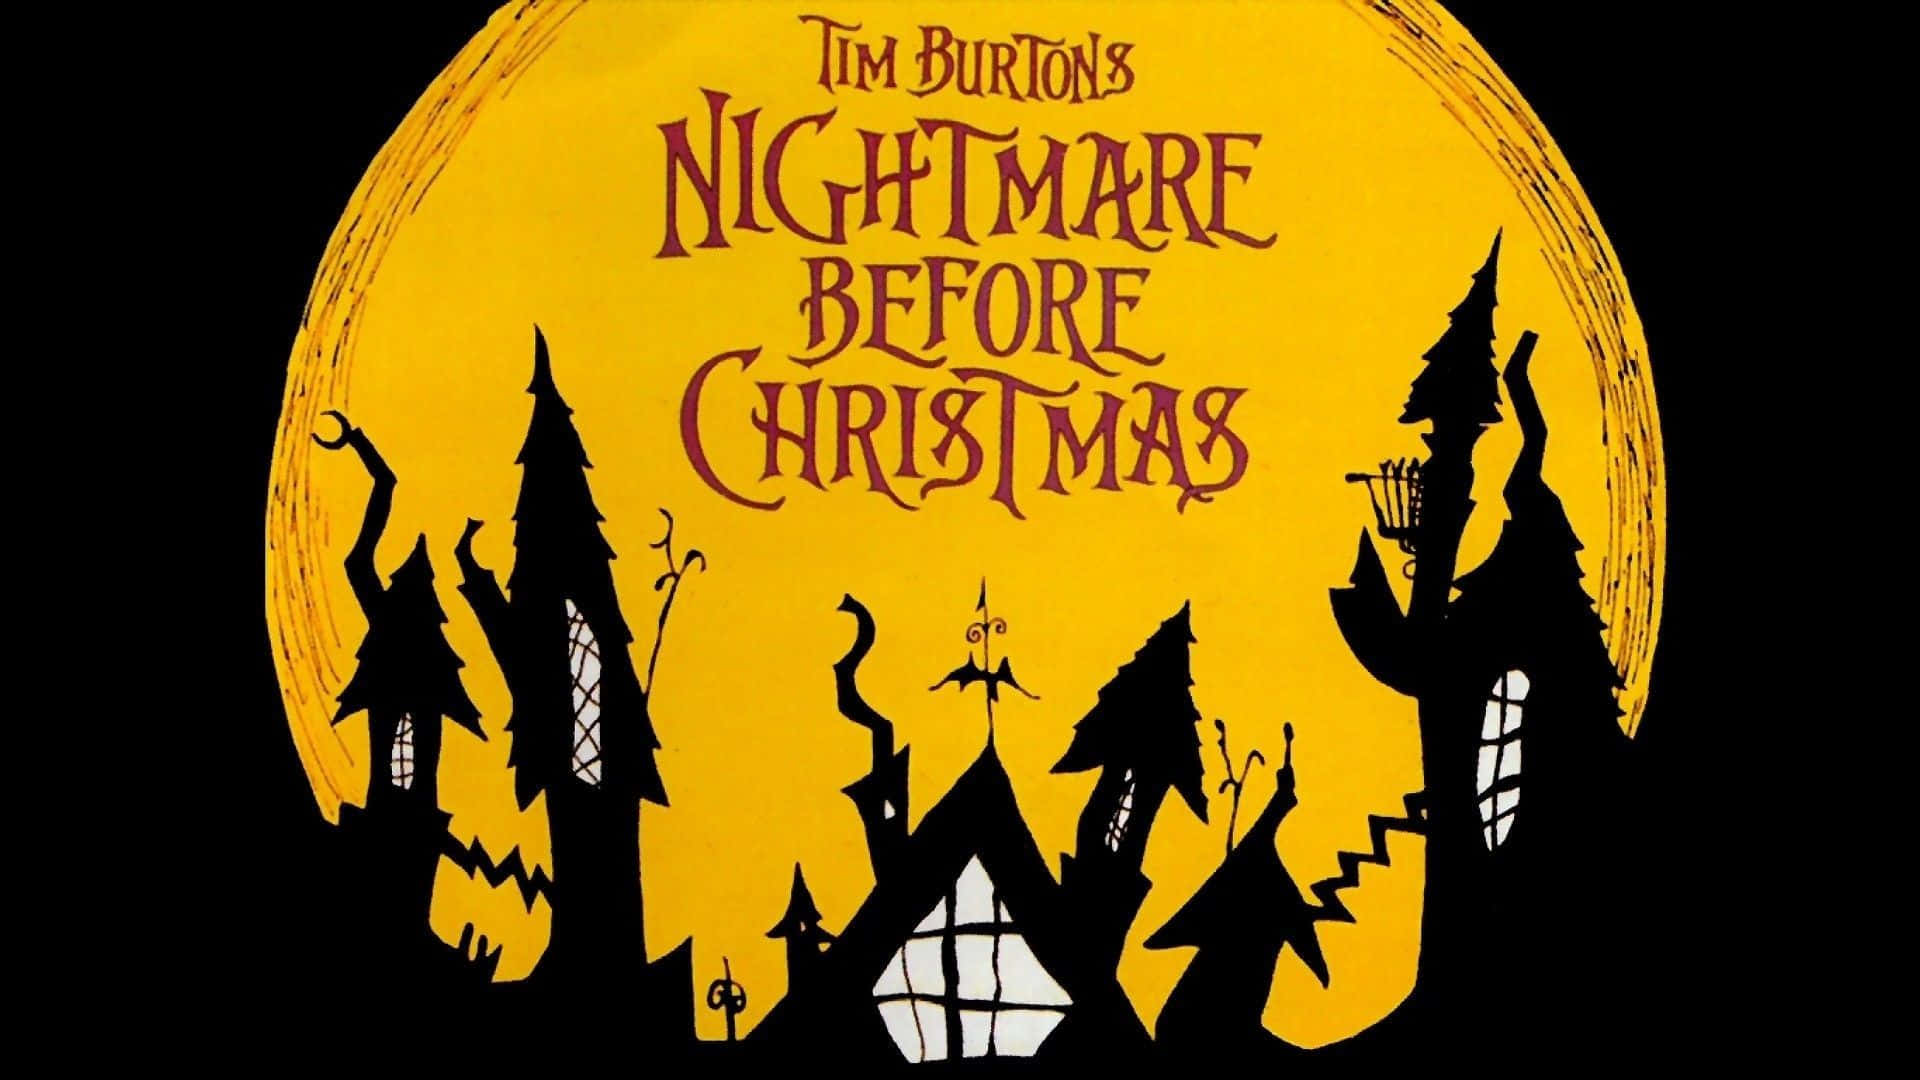 Jack Skellington and the festive, dark world of "The Nightmare Before Christmas"